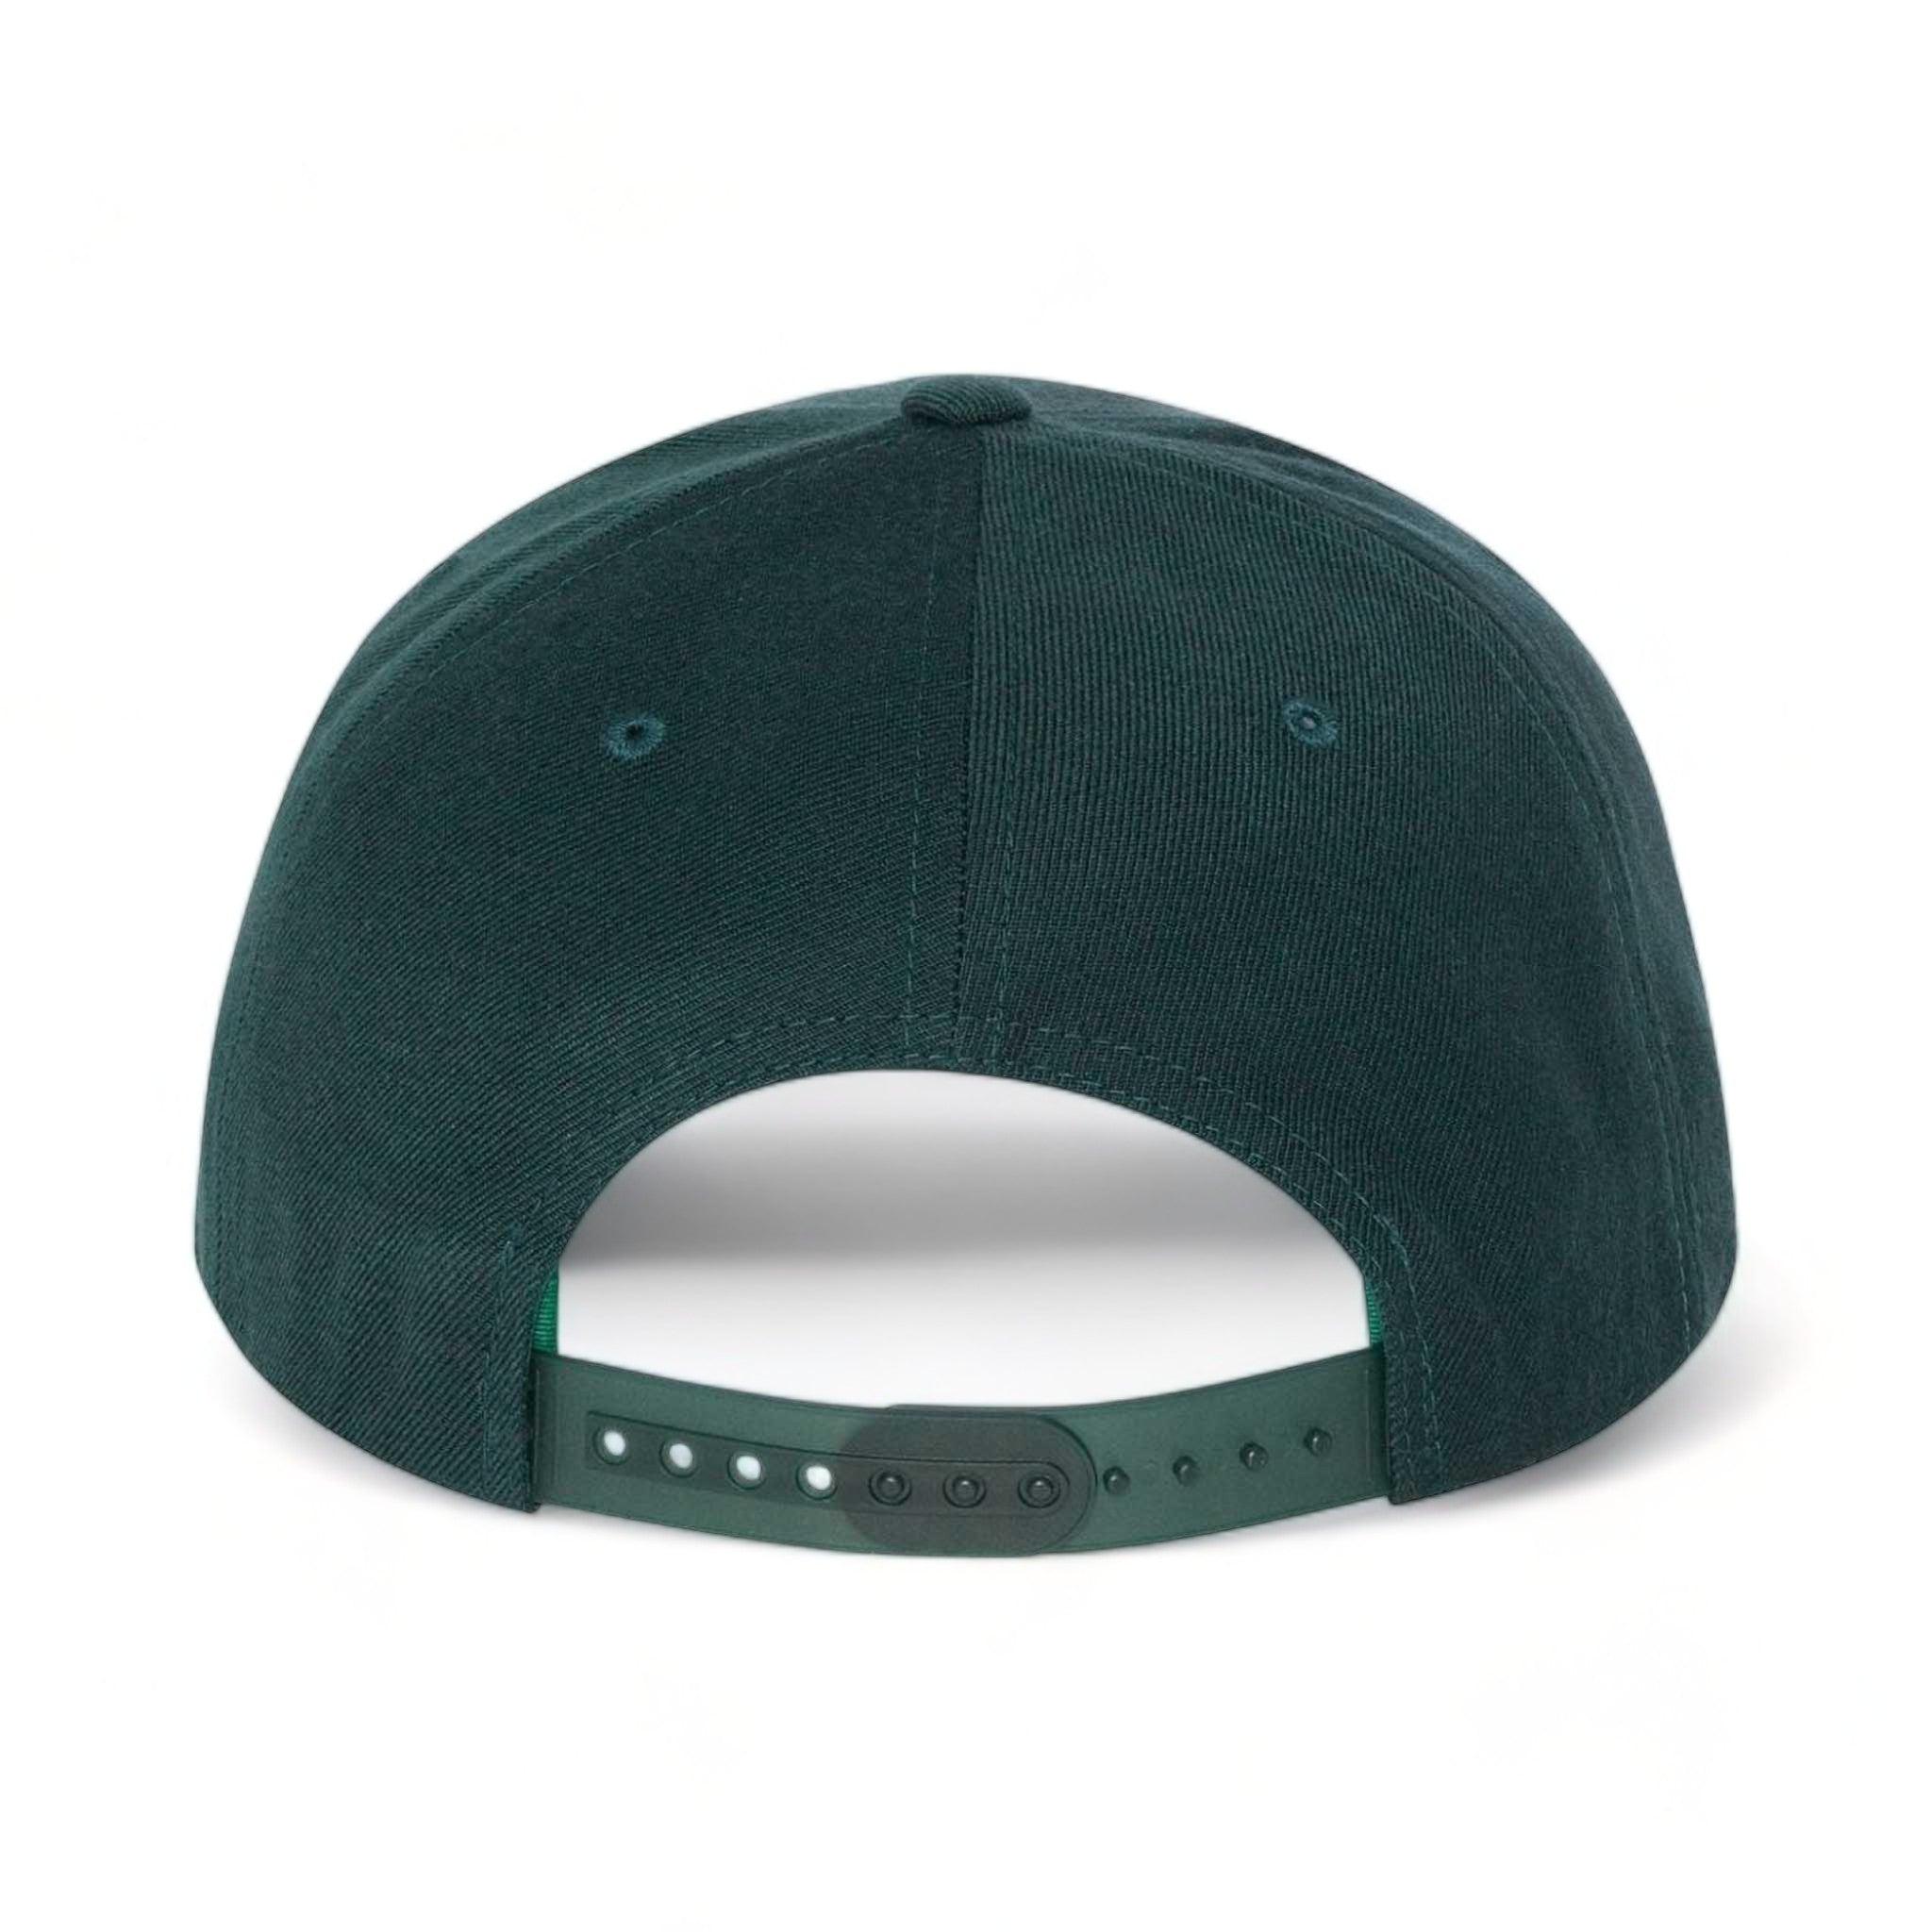 Back view of YP Classics 6089M custom hat in spruce